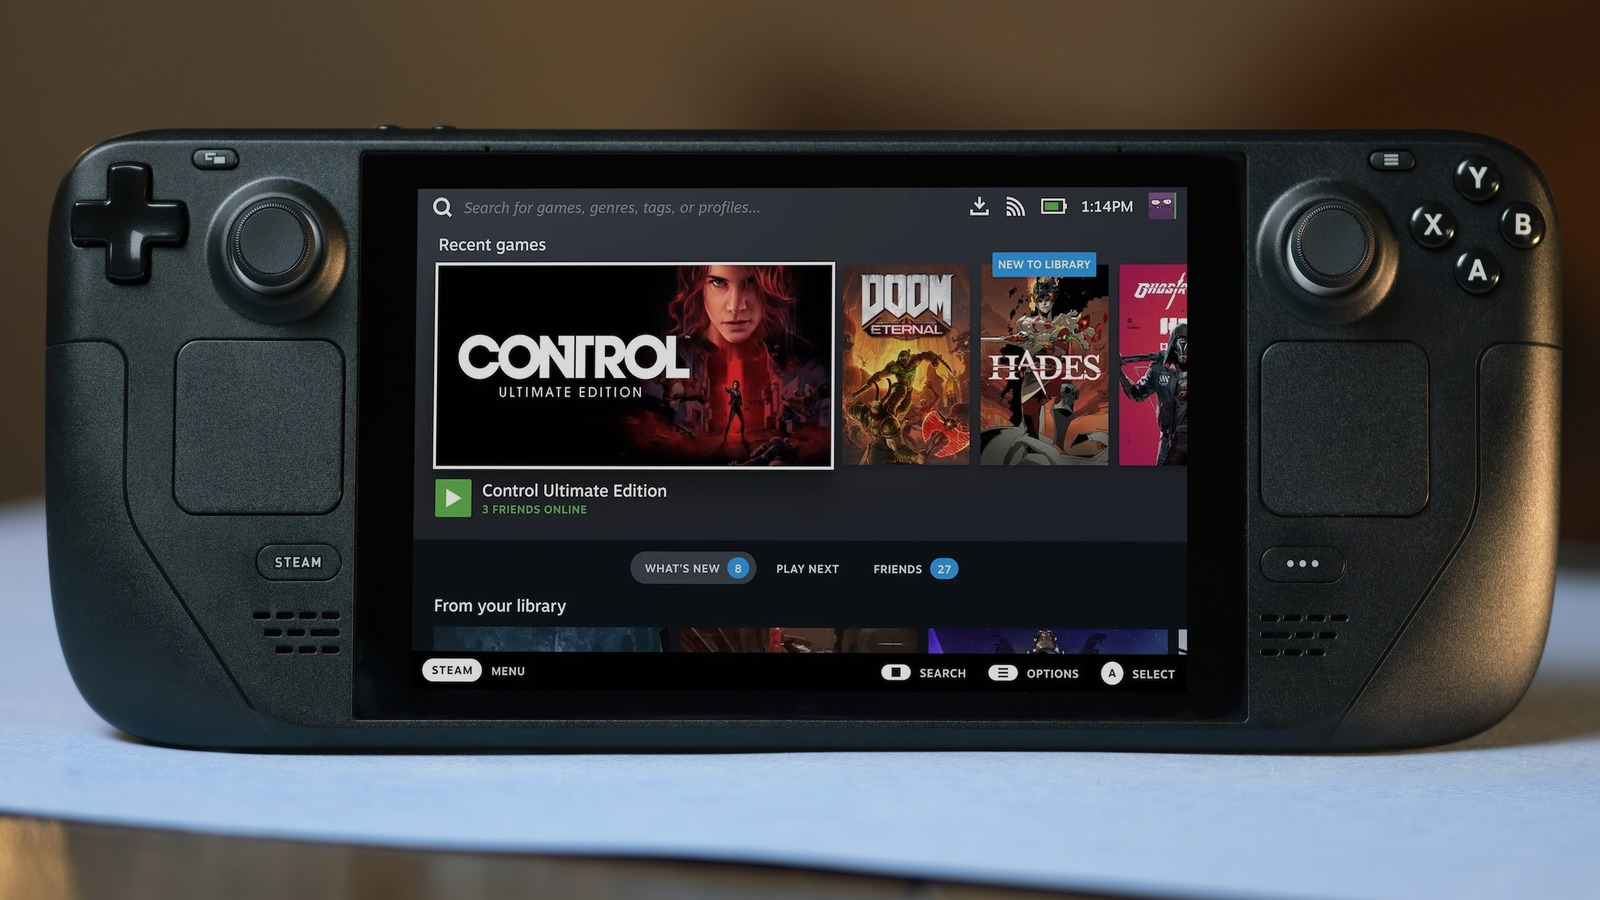 Steam Deck Handheld Is Back on Sale With Up to 20% Off, Dropping